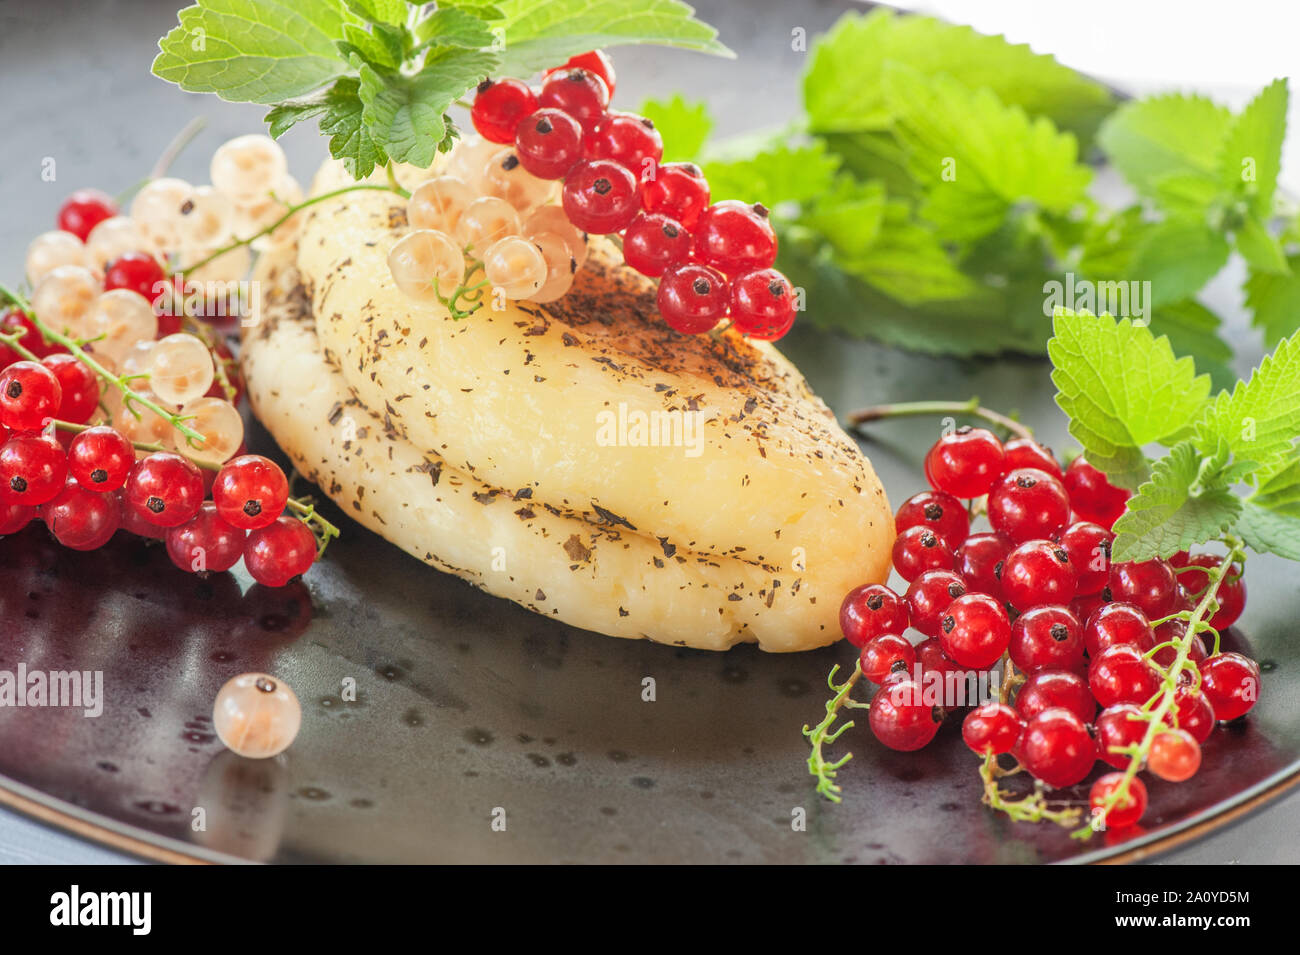 Grilled halloumi cheese with red currants and mint leaves. Unconventional serving of halloumi cheese. Farm natural product. Close-up. Stock Photo